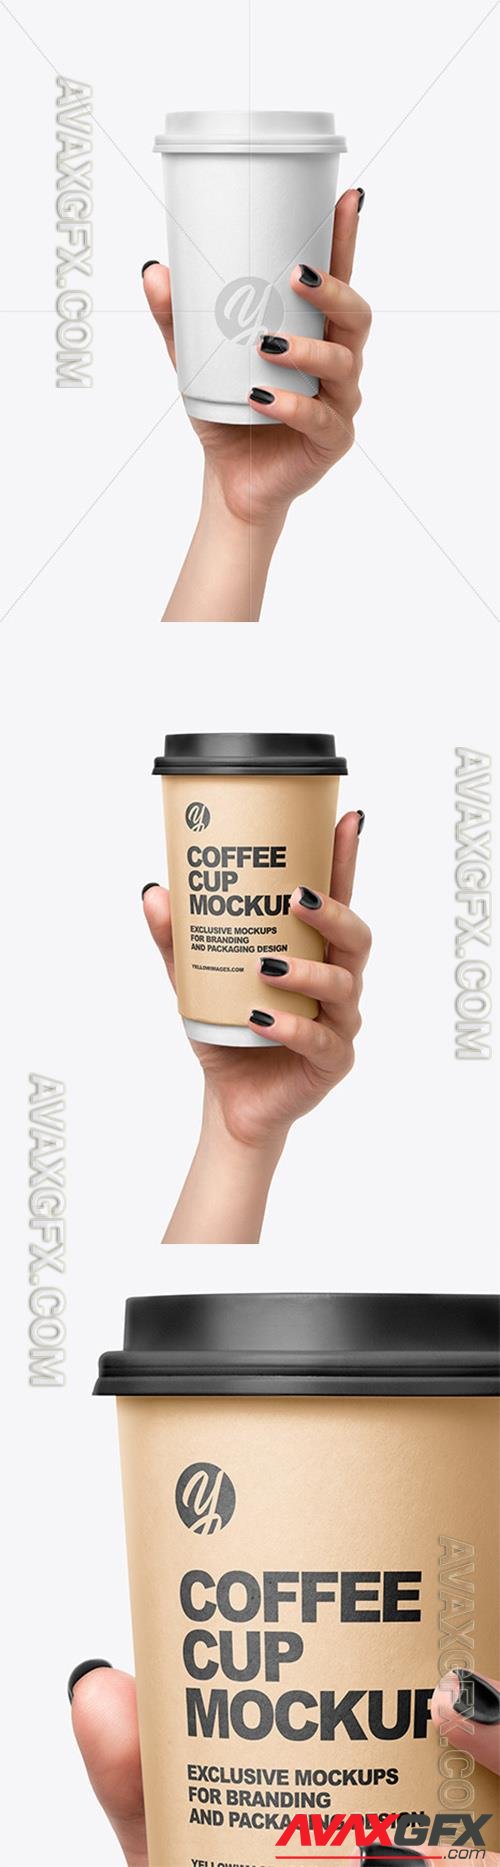 Coffee Cup in a Hand Mockup 56737 TIF